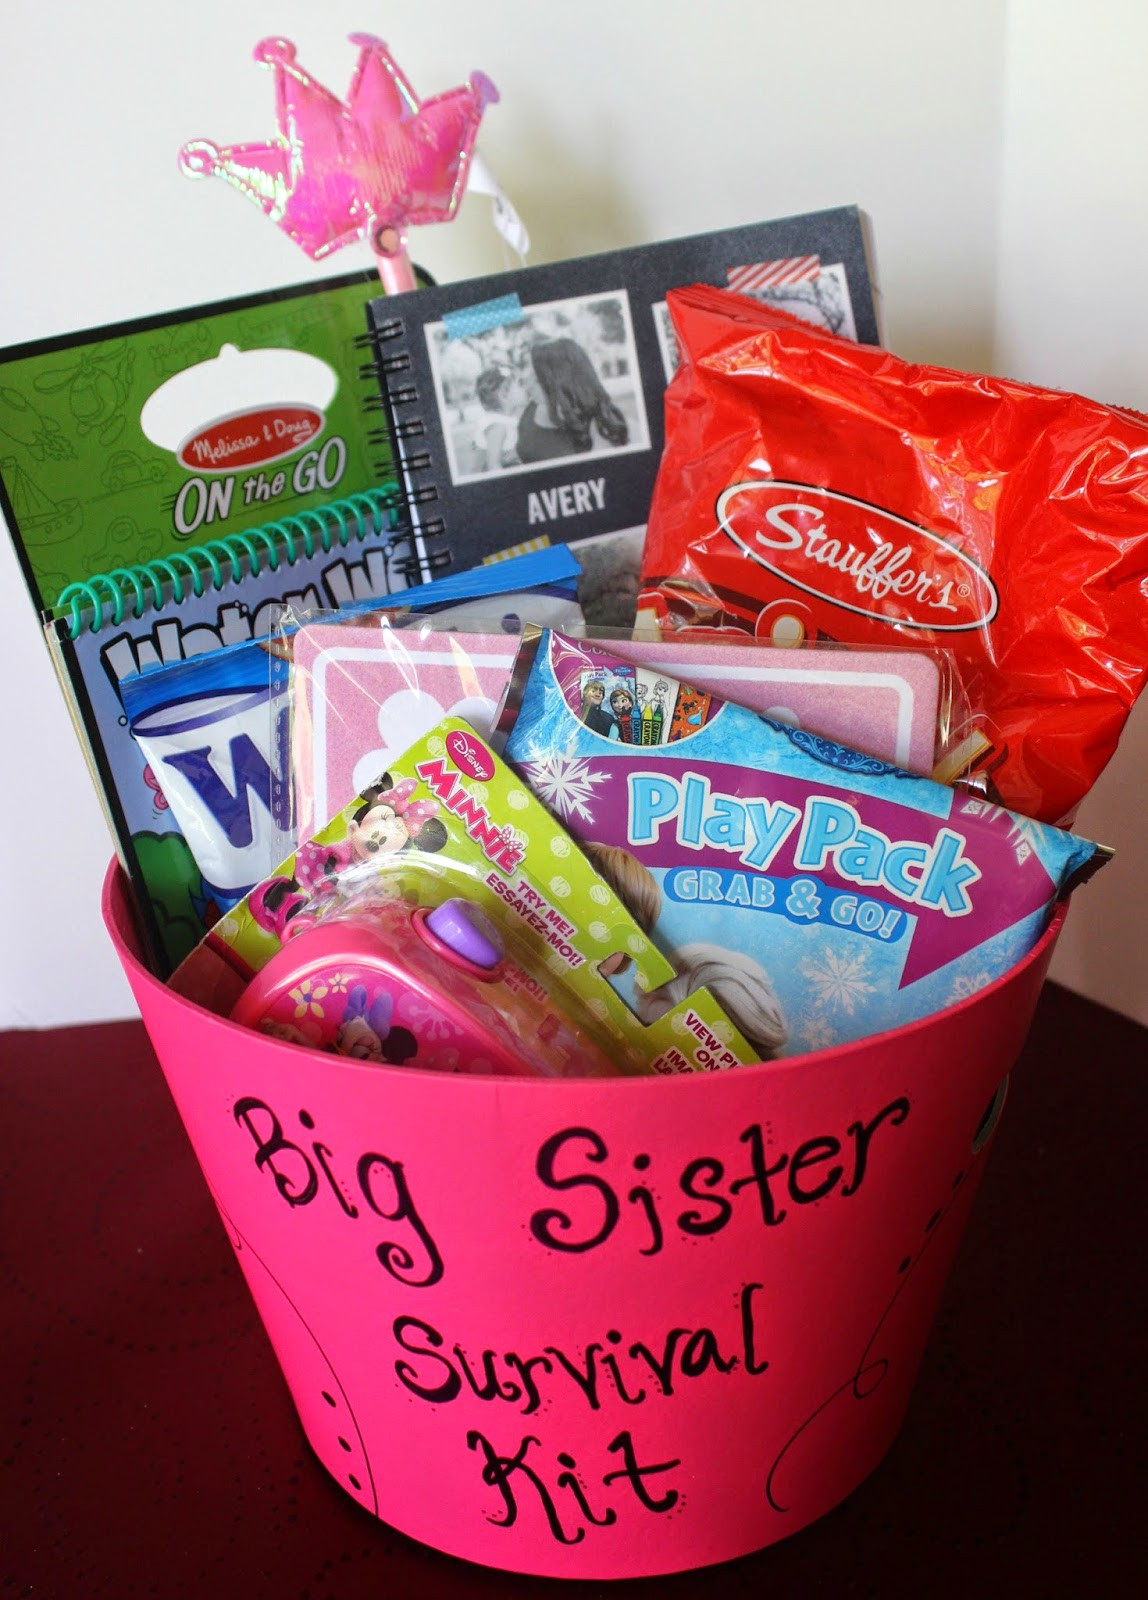 Gift Ideas From Baby To Big Sister
 simply made with love Big Sister Survival Kit